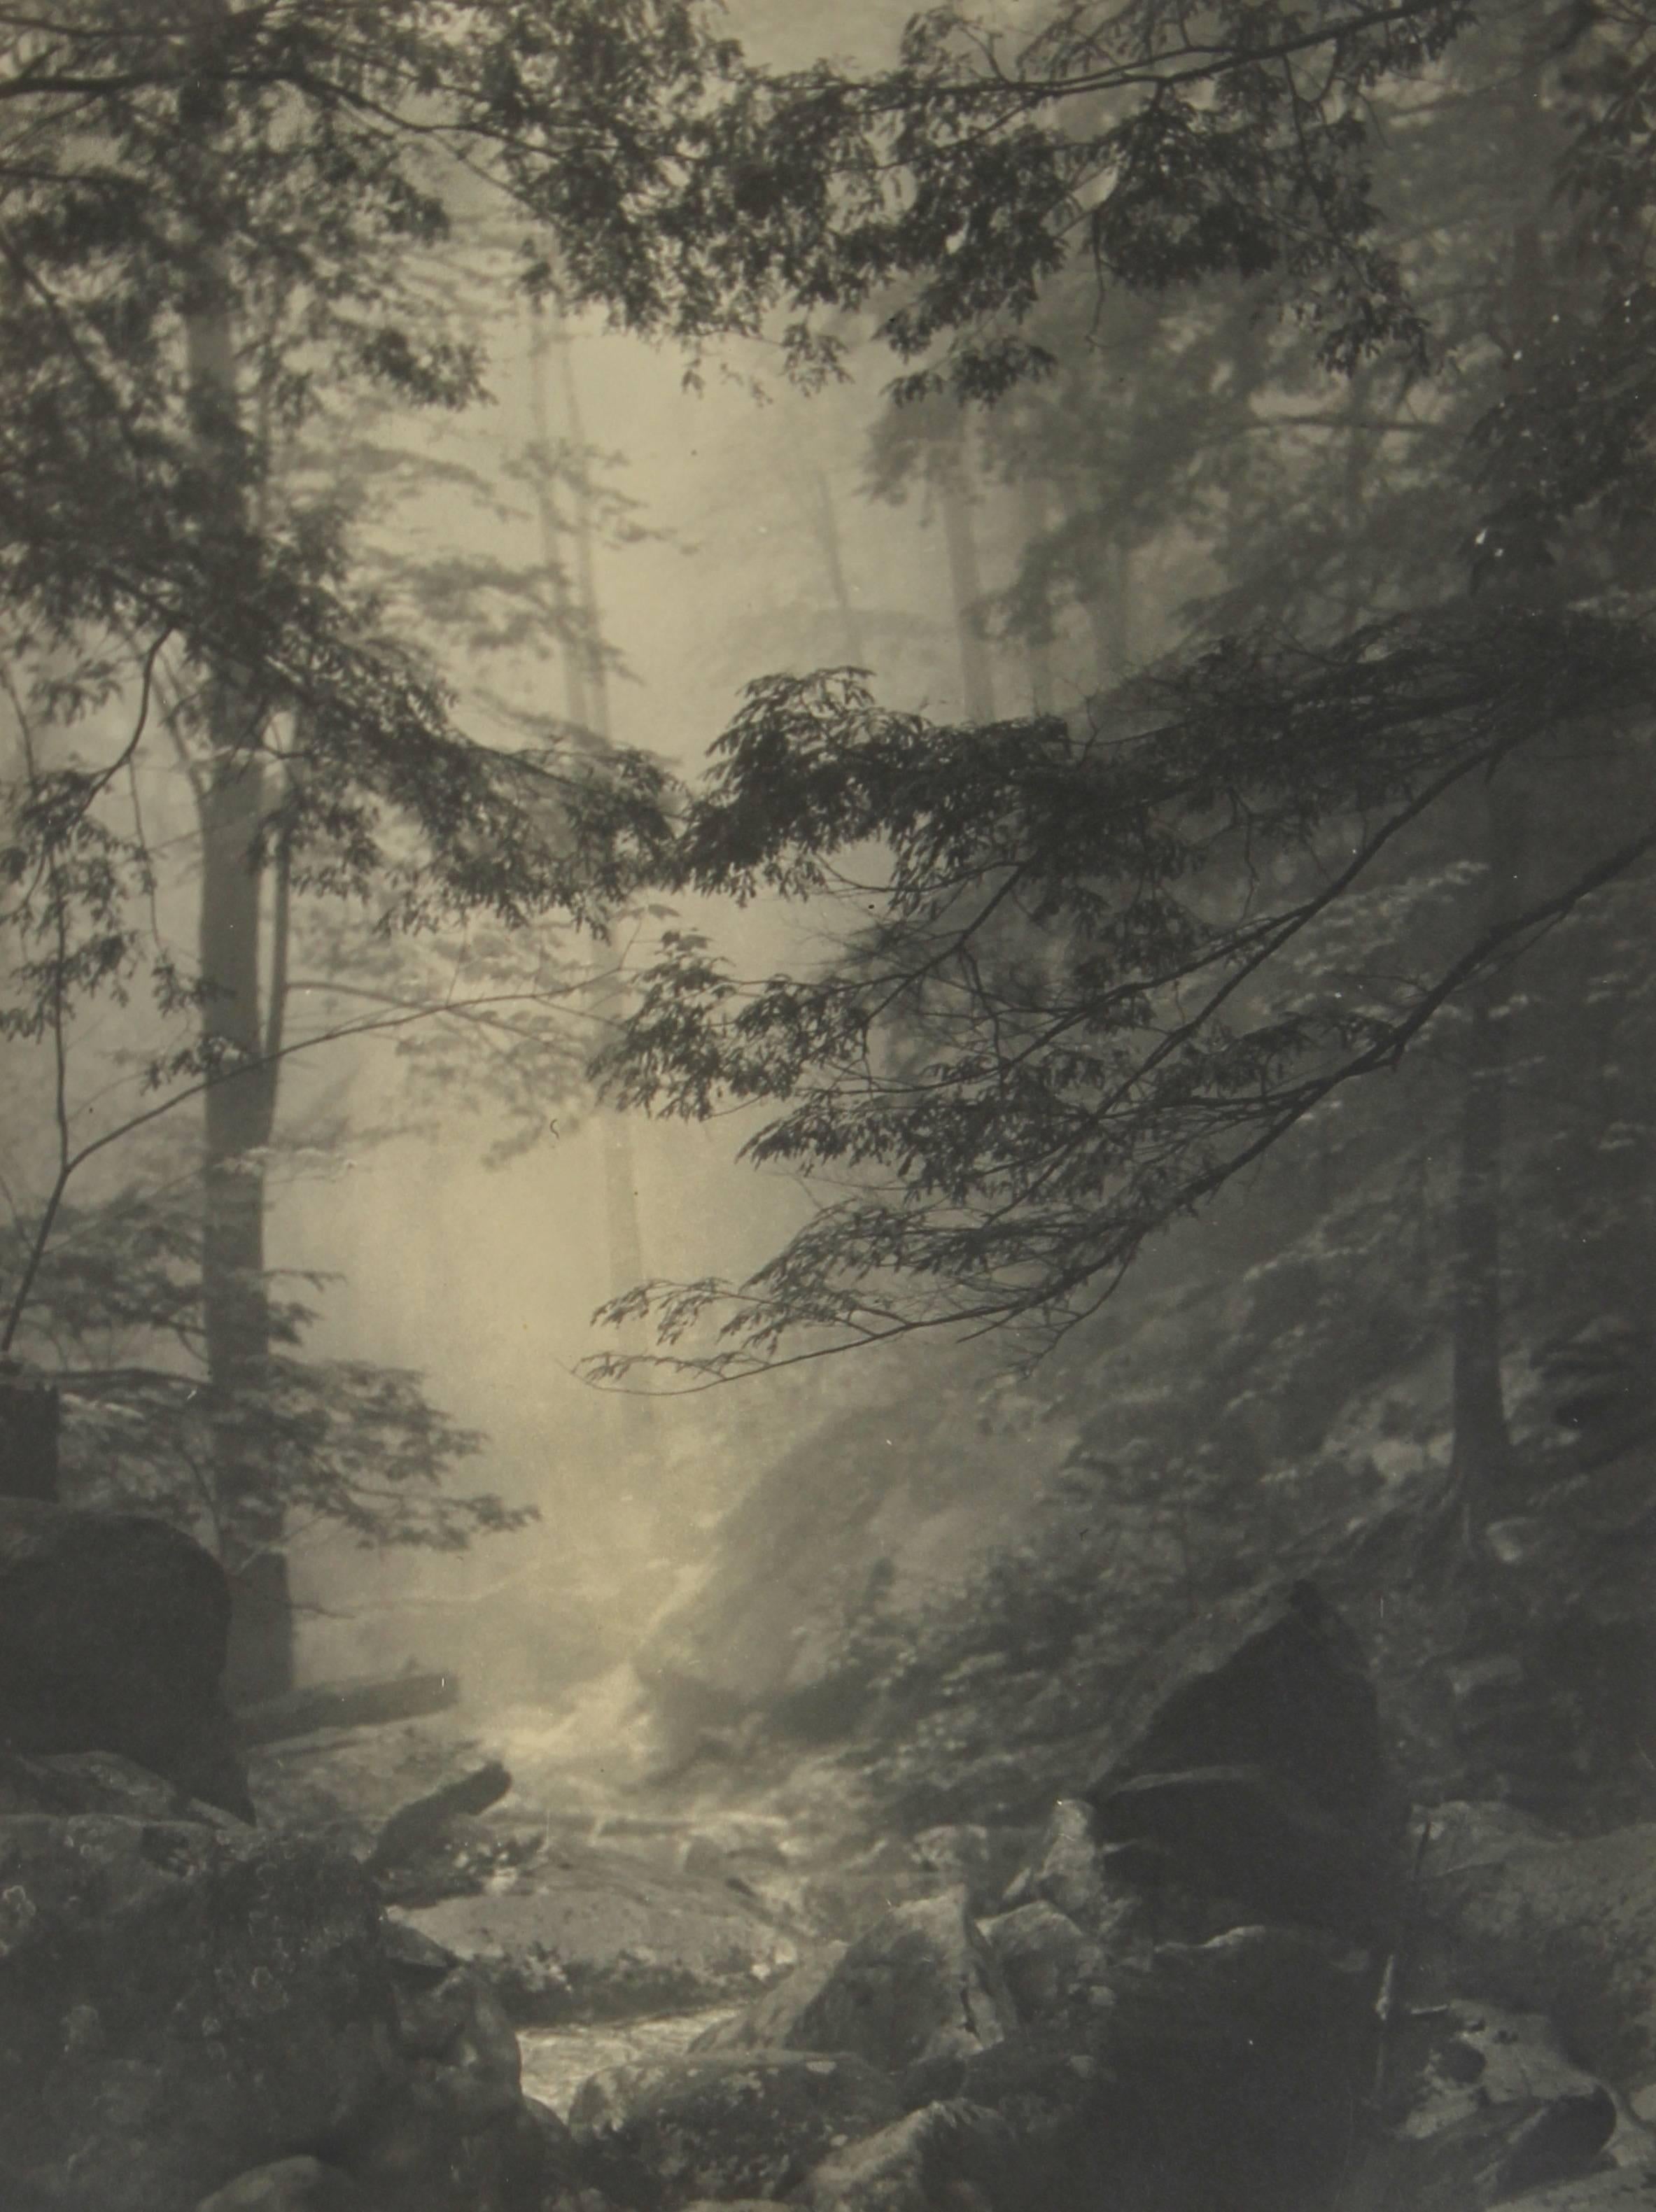 This circa late 1920s silver gelatin photograph forest scene with fog, trees, and a stream is by Dr. F.W. Buraky, a member of the Chicago Camera Club.
The piece will be shipped in a mat to fit a standard sized frame.
